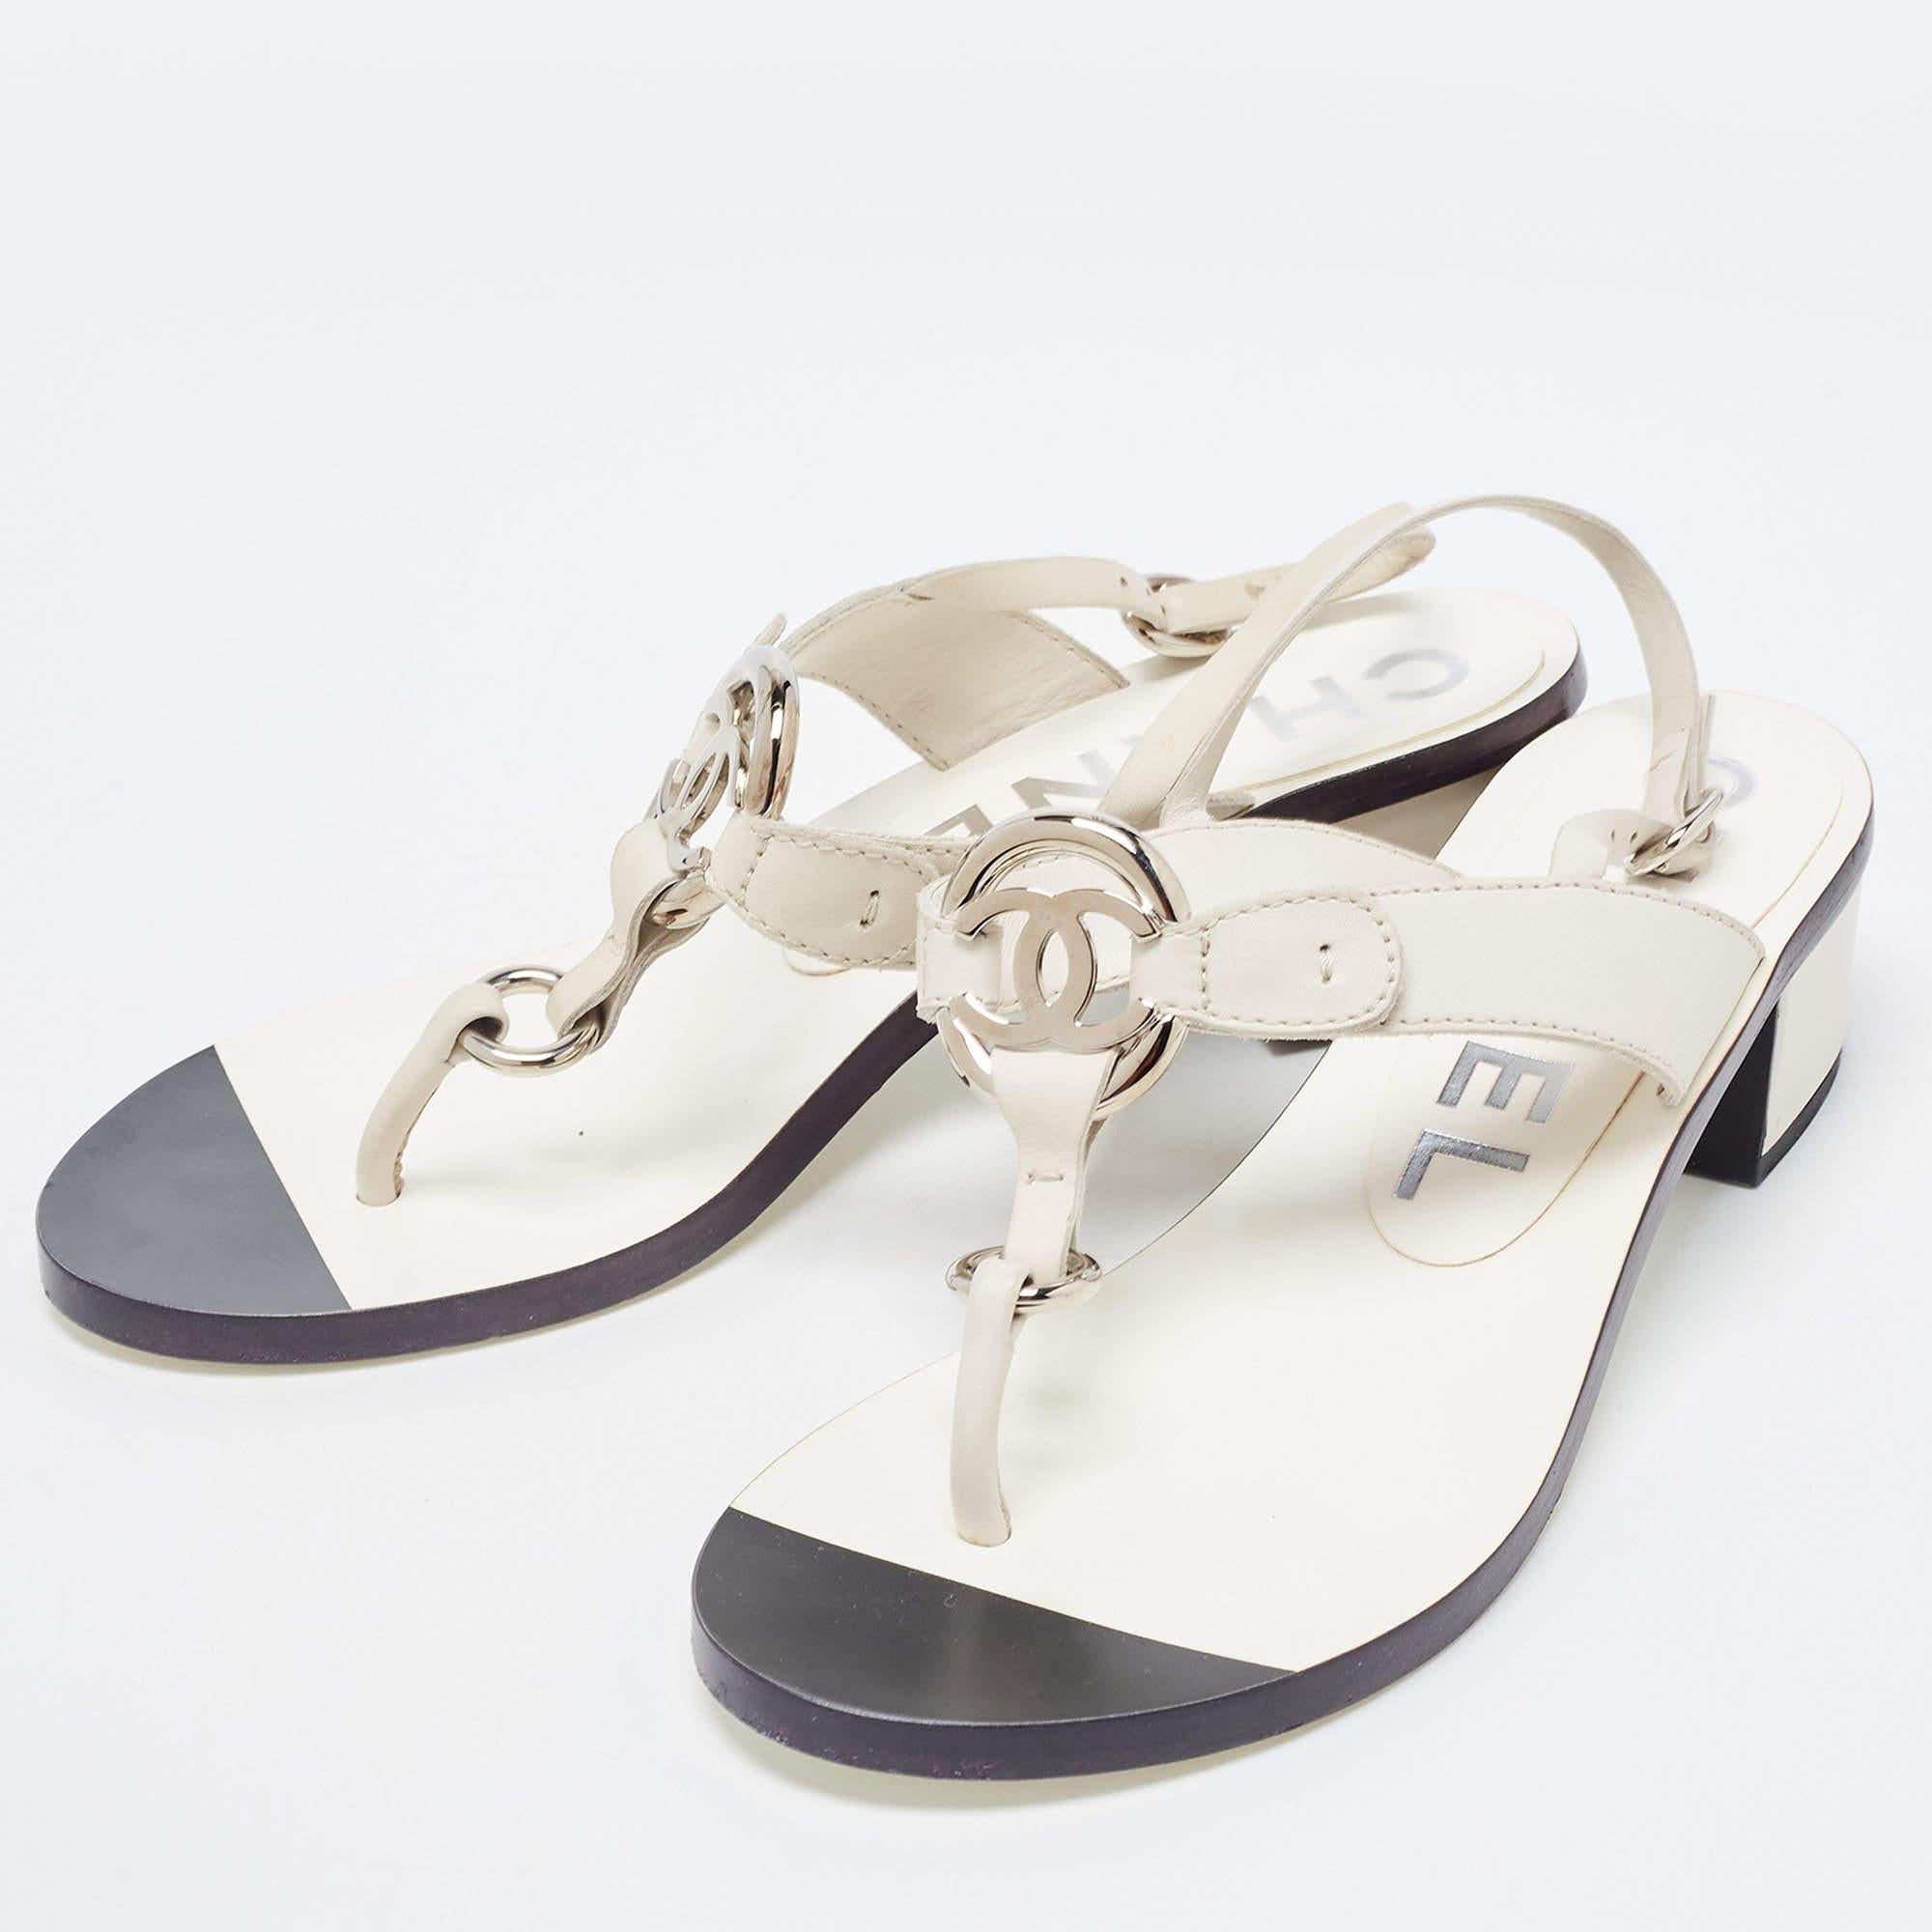 Chanel White Leather Slingback Sandals Size 37 4